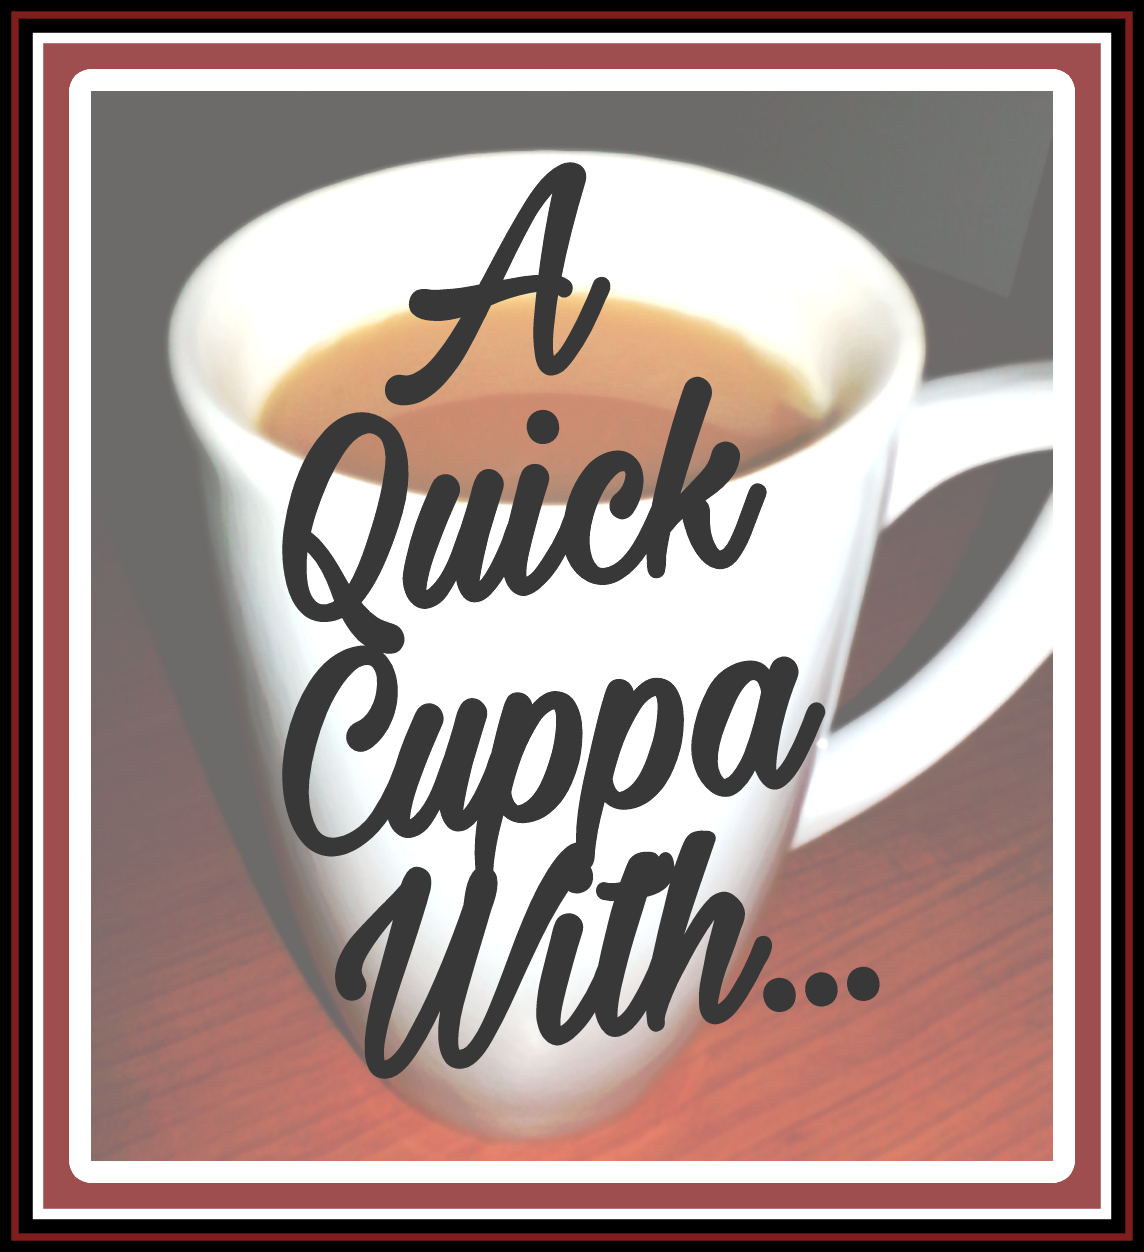 A Quick Cuppa With, Living Life Our Way, blogger, small business owner, independents, Q and A, interview